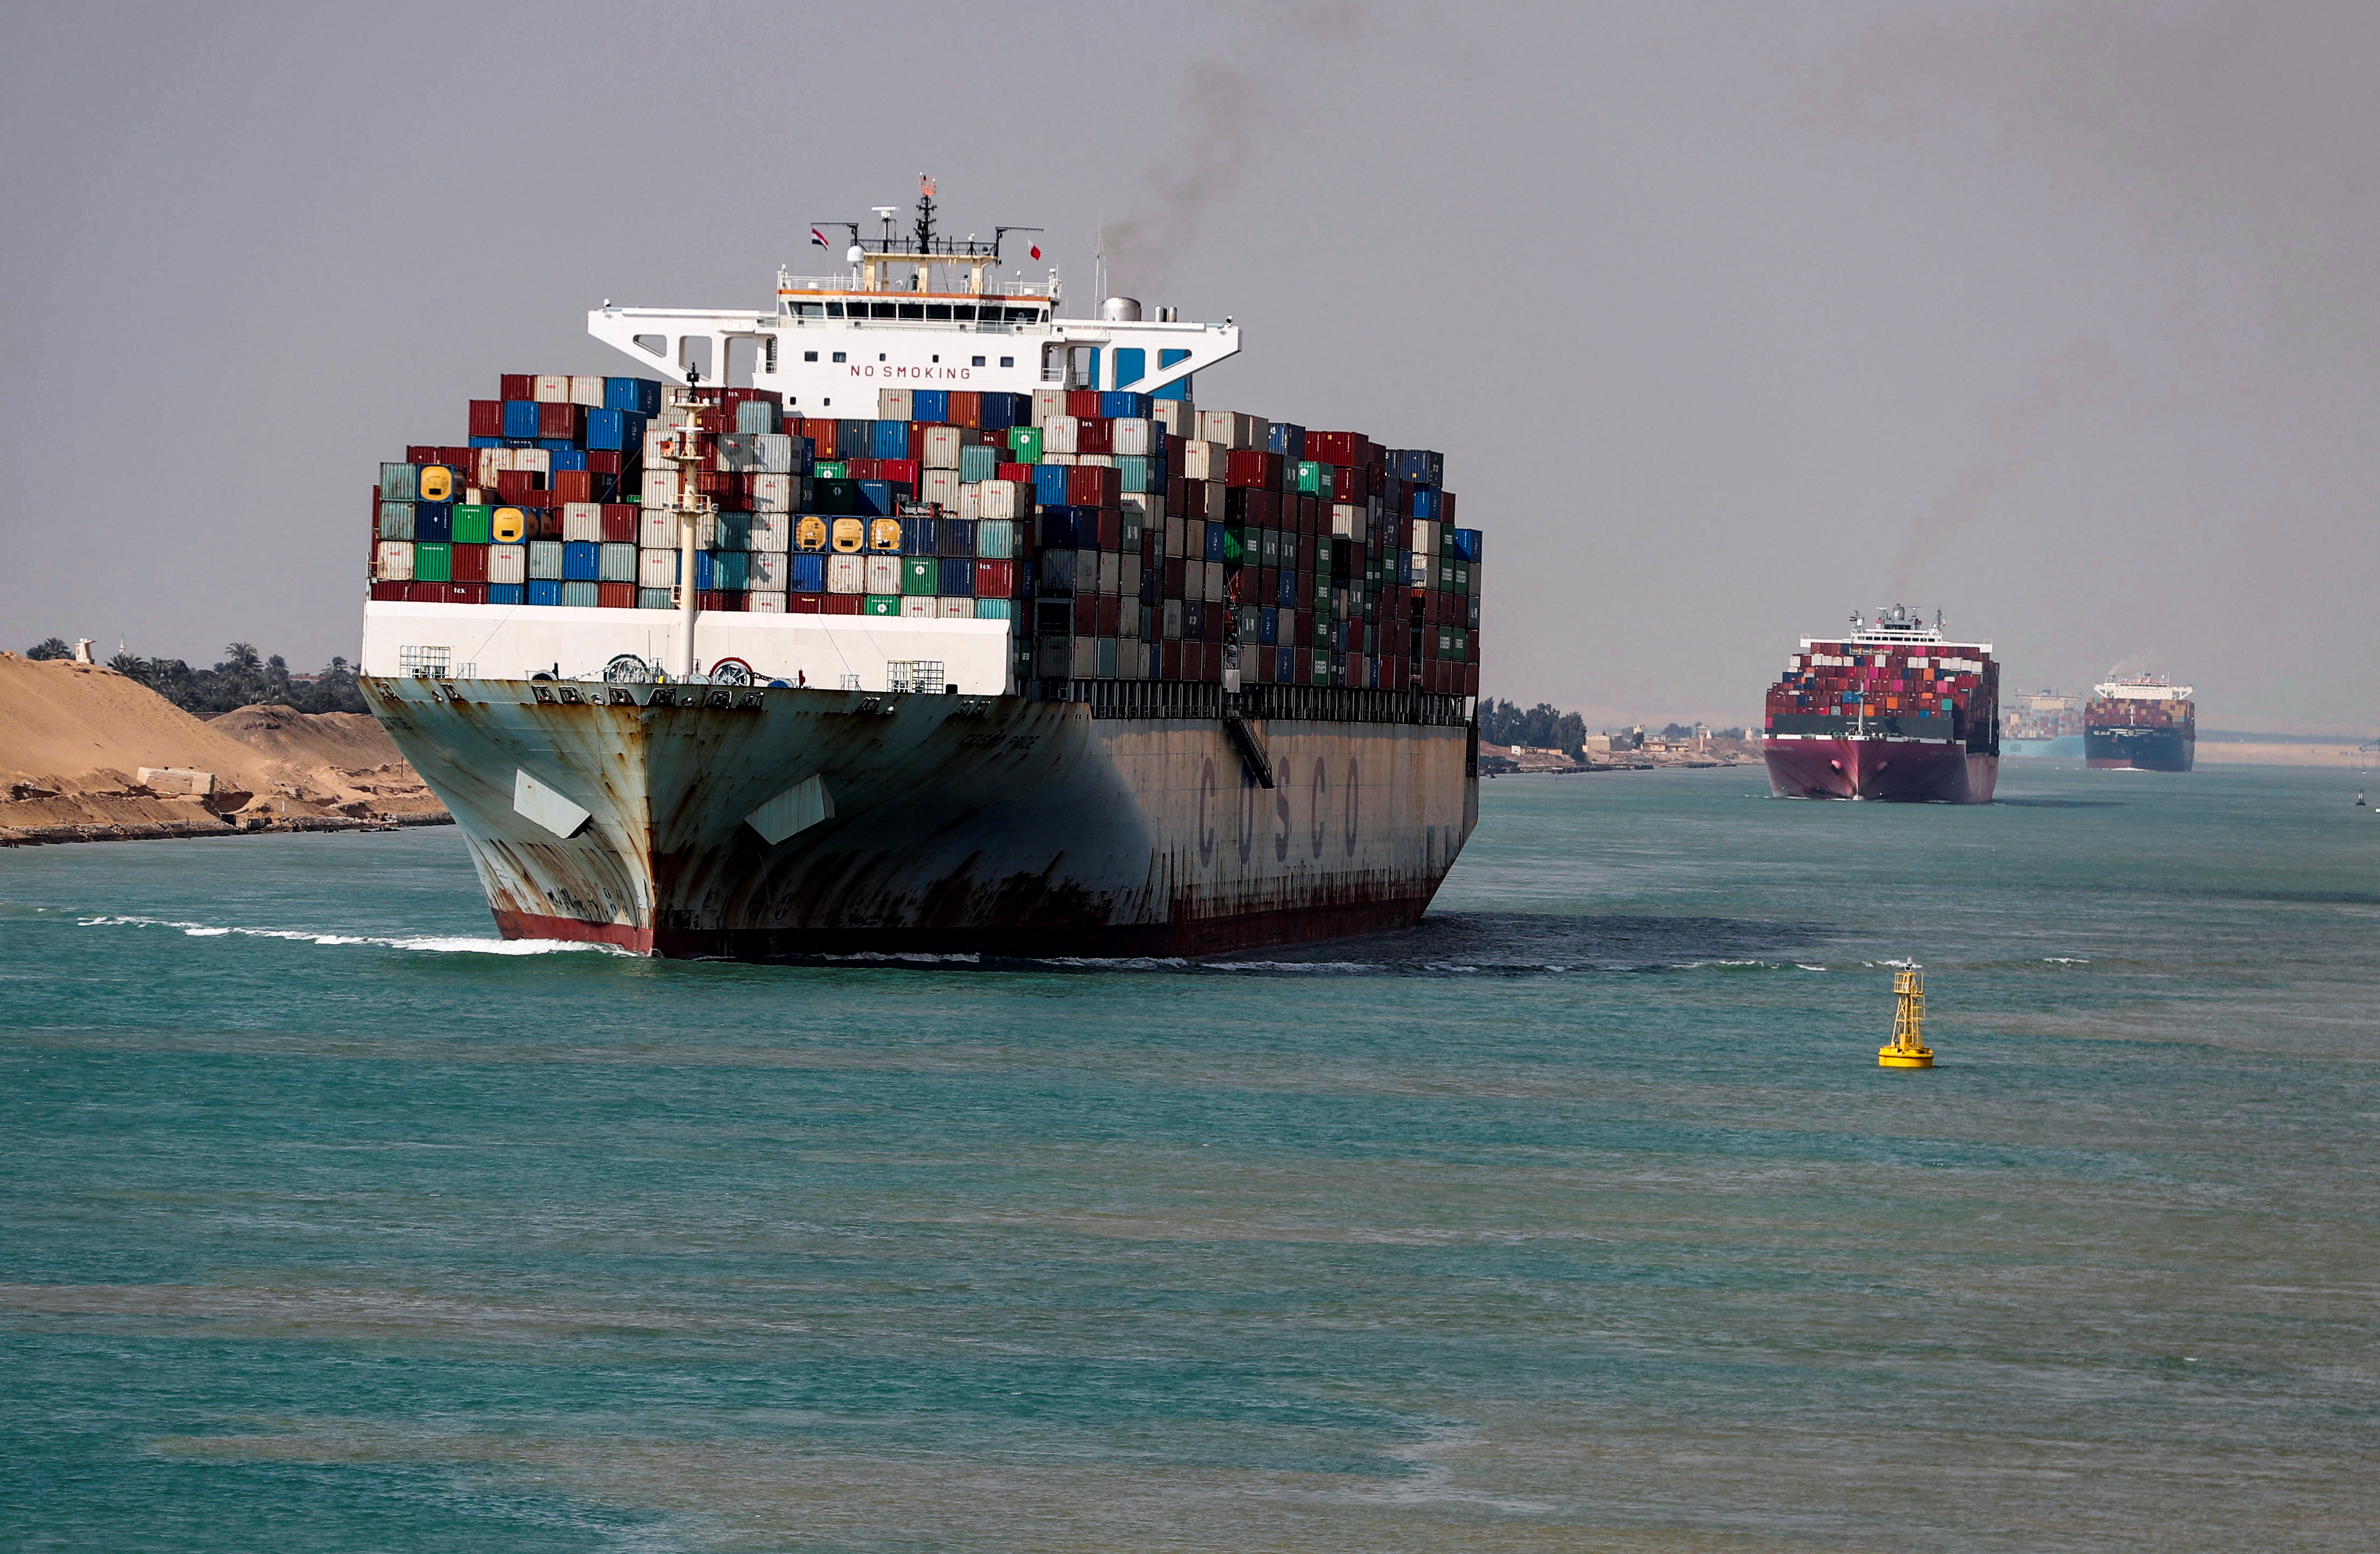 Shipping containers pass through the Suez Canal in Suez